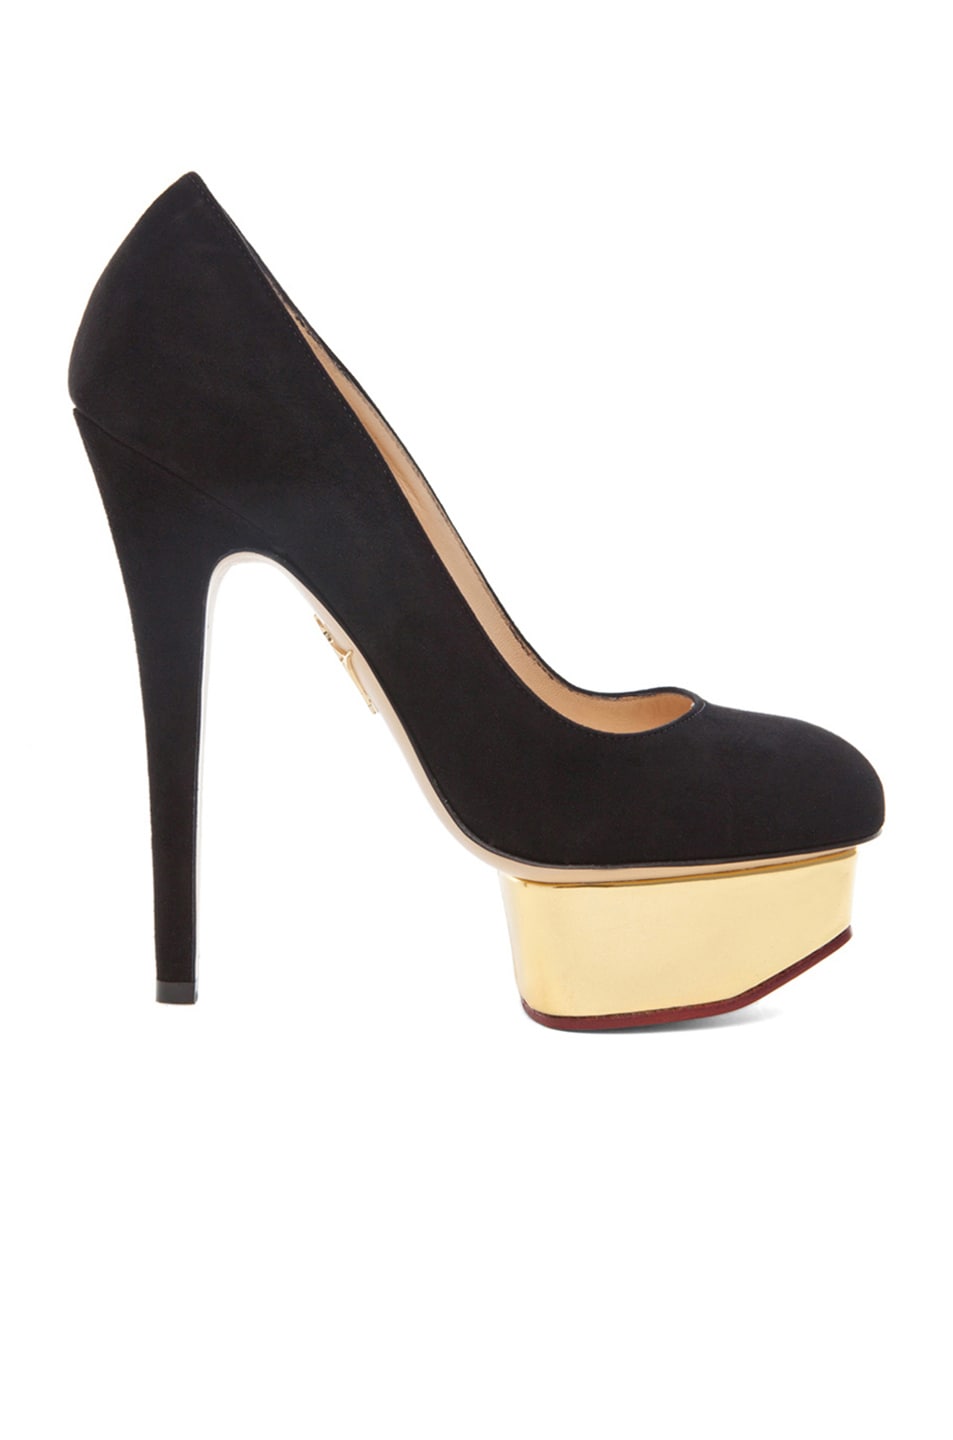 CHARLOTTE OLYMPIA Dolly Signature Court Island Suede Pumps in Black